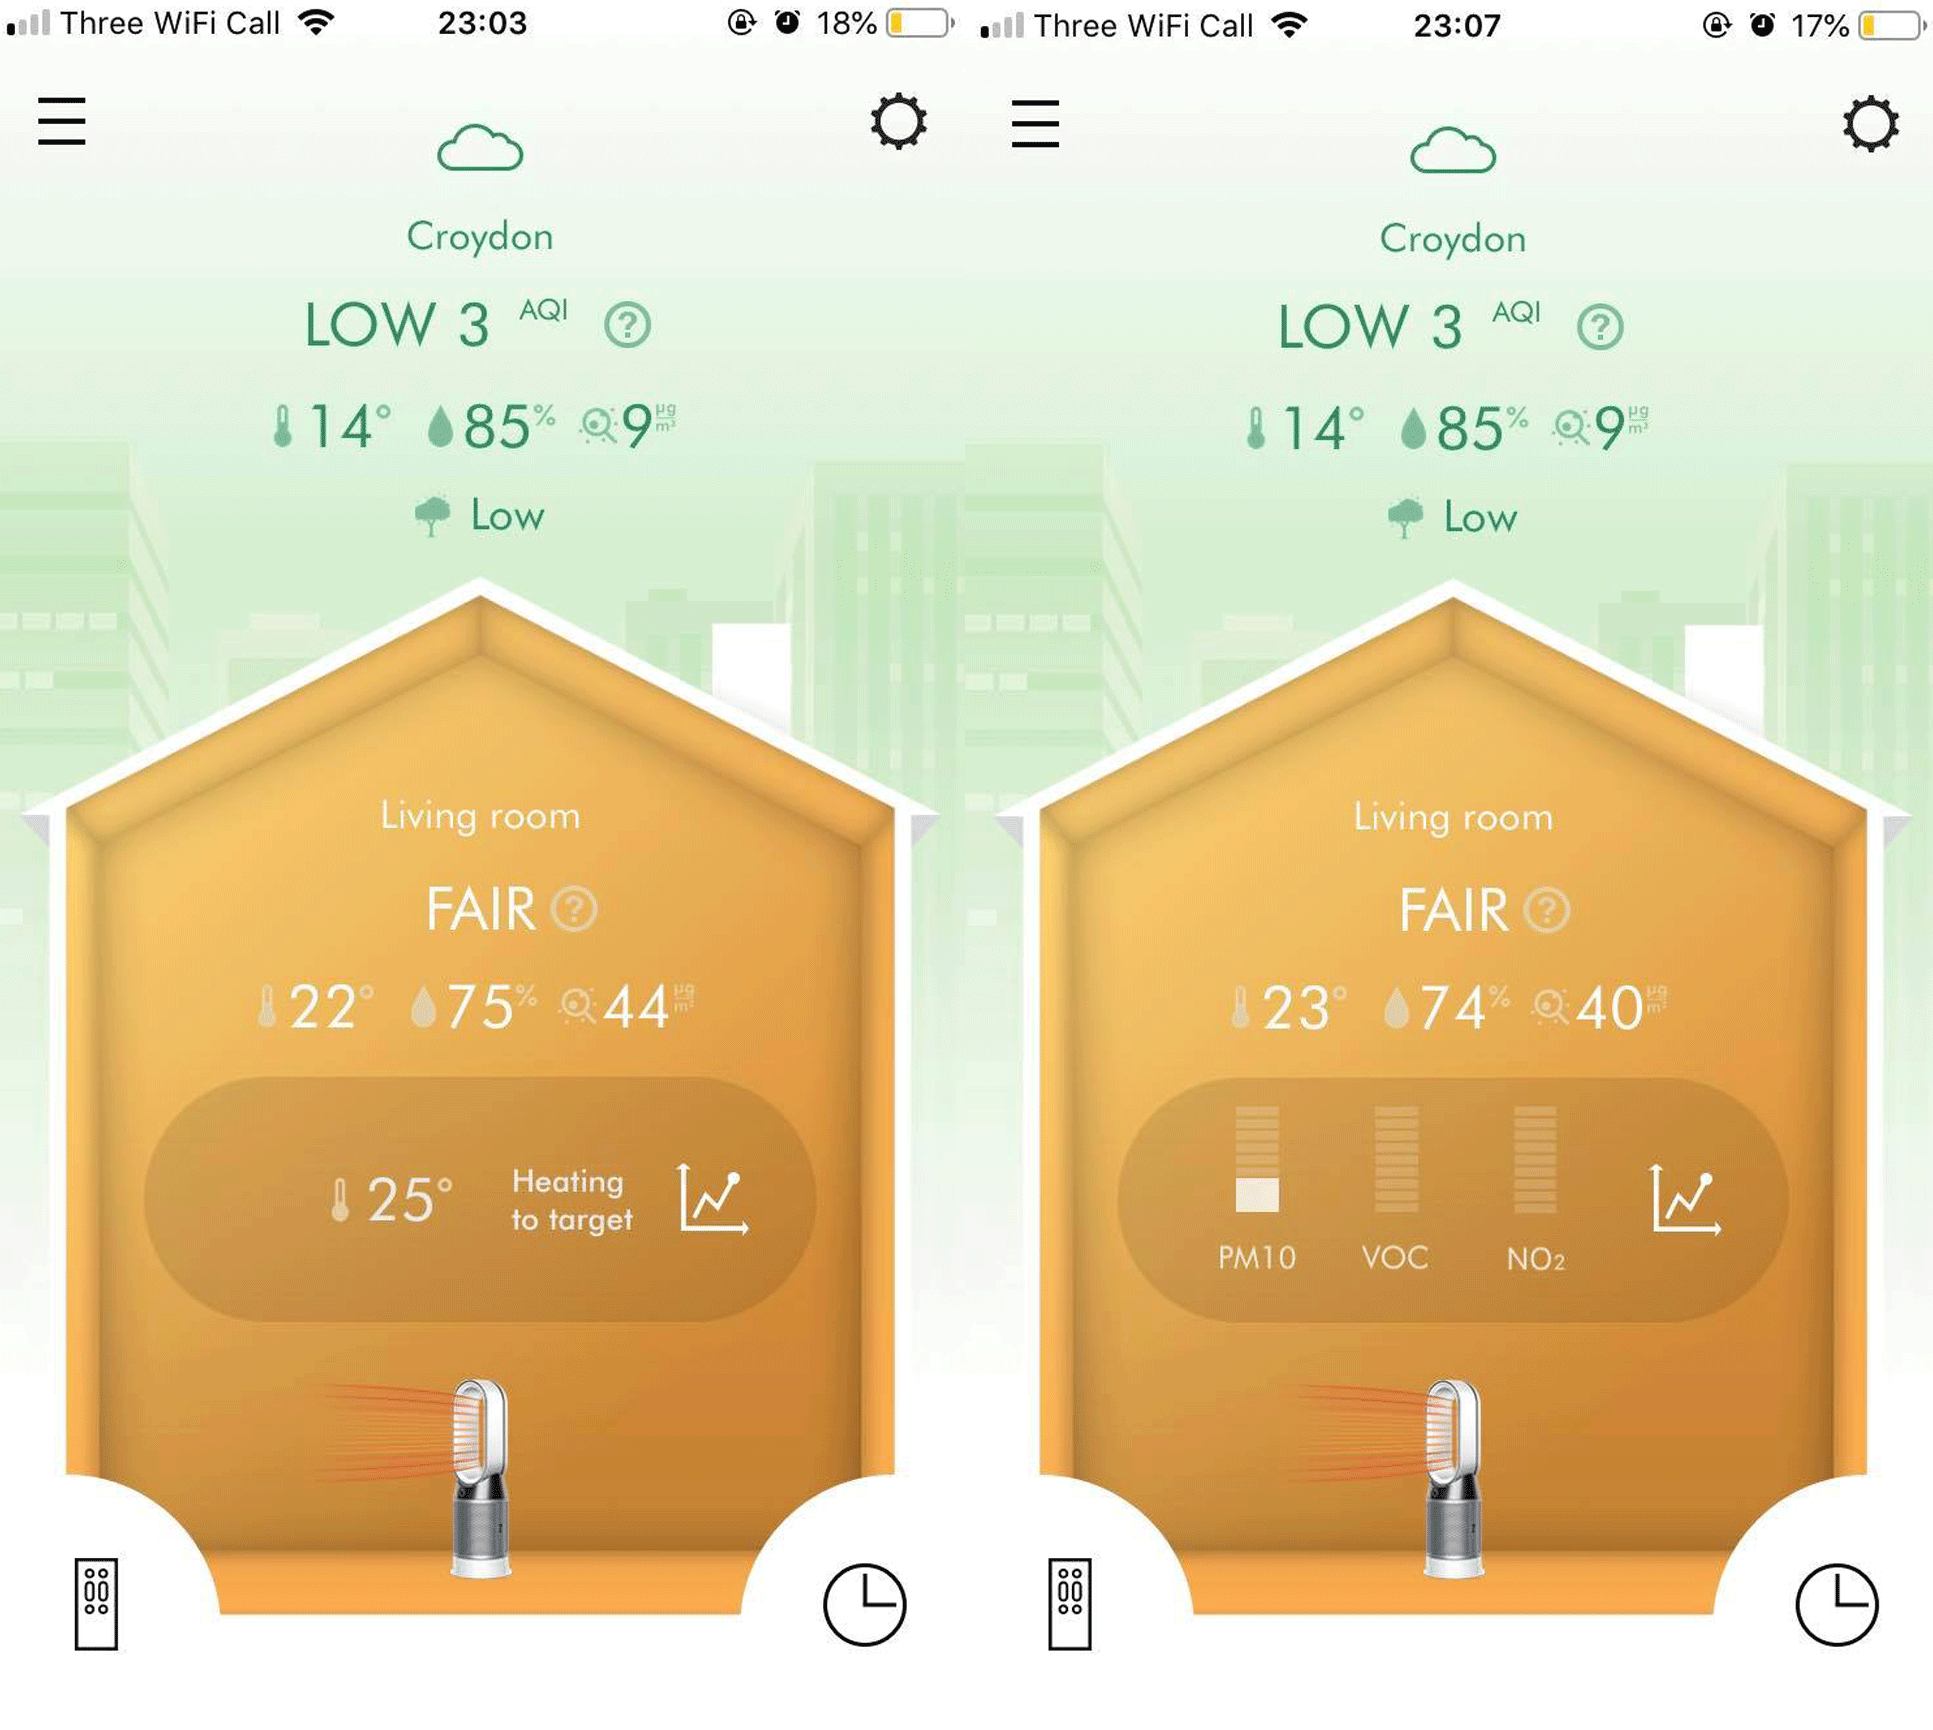 Dyson fan app statistics for heating and air pollution